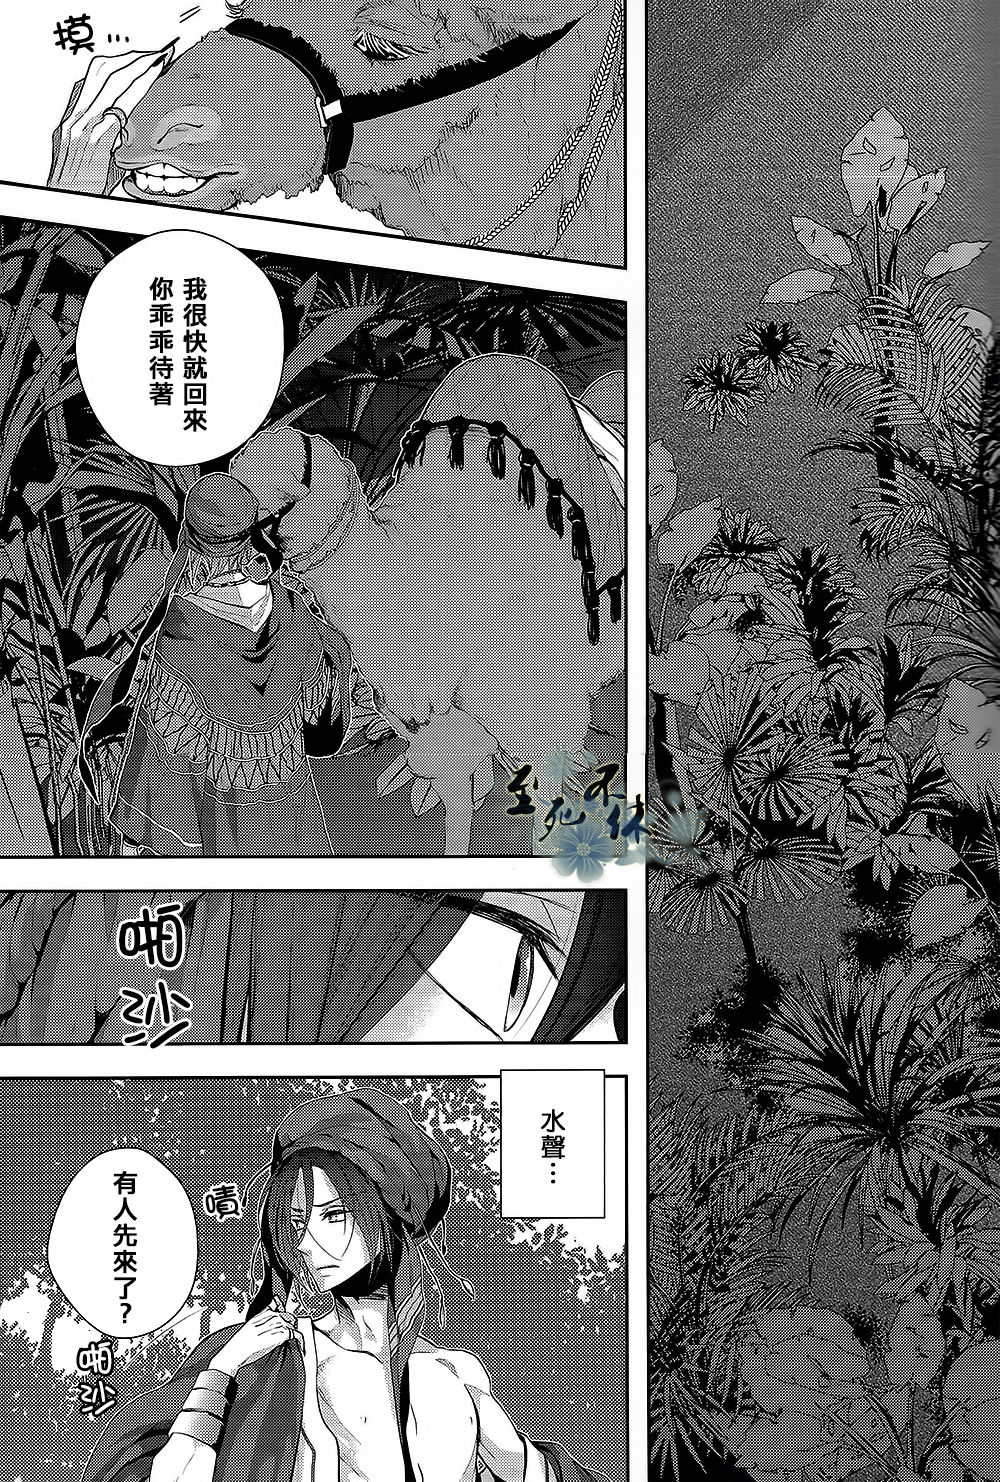 (SUPERKansai19) [Ibe (Inose)] An Oasis In The Desert (Free!) [Chinese] (SUPER関西19) [Ibe (イノセ)] An oasis in the desert (Free!) [中文翻譯]